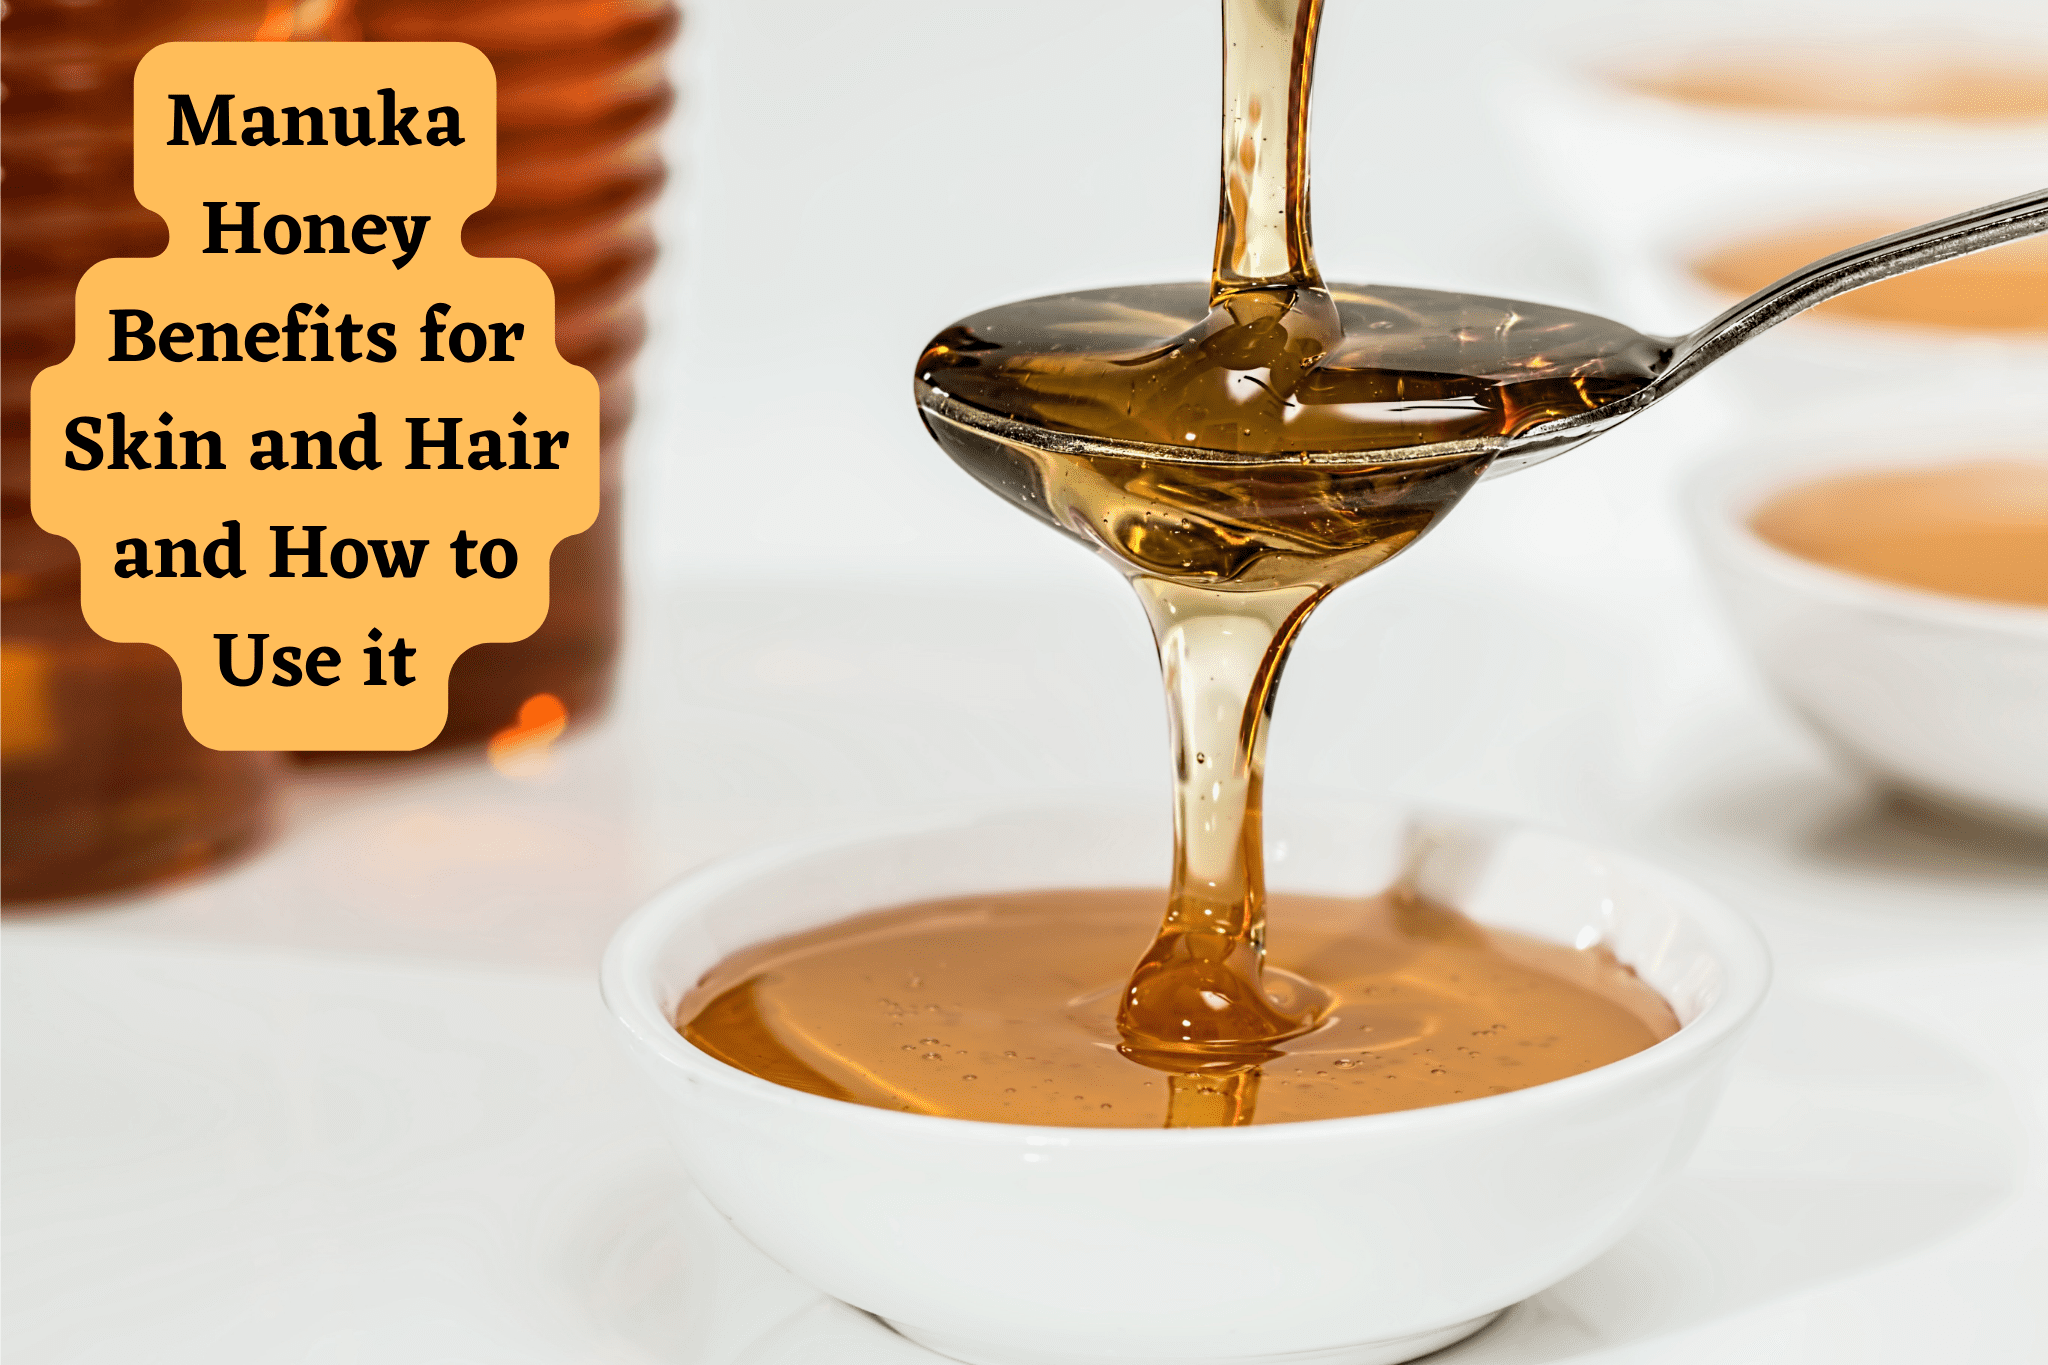 Manuka Honey Benefits for Skin and Hair and How to Use it